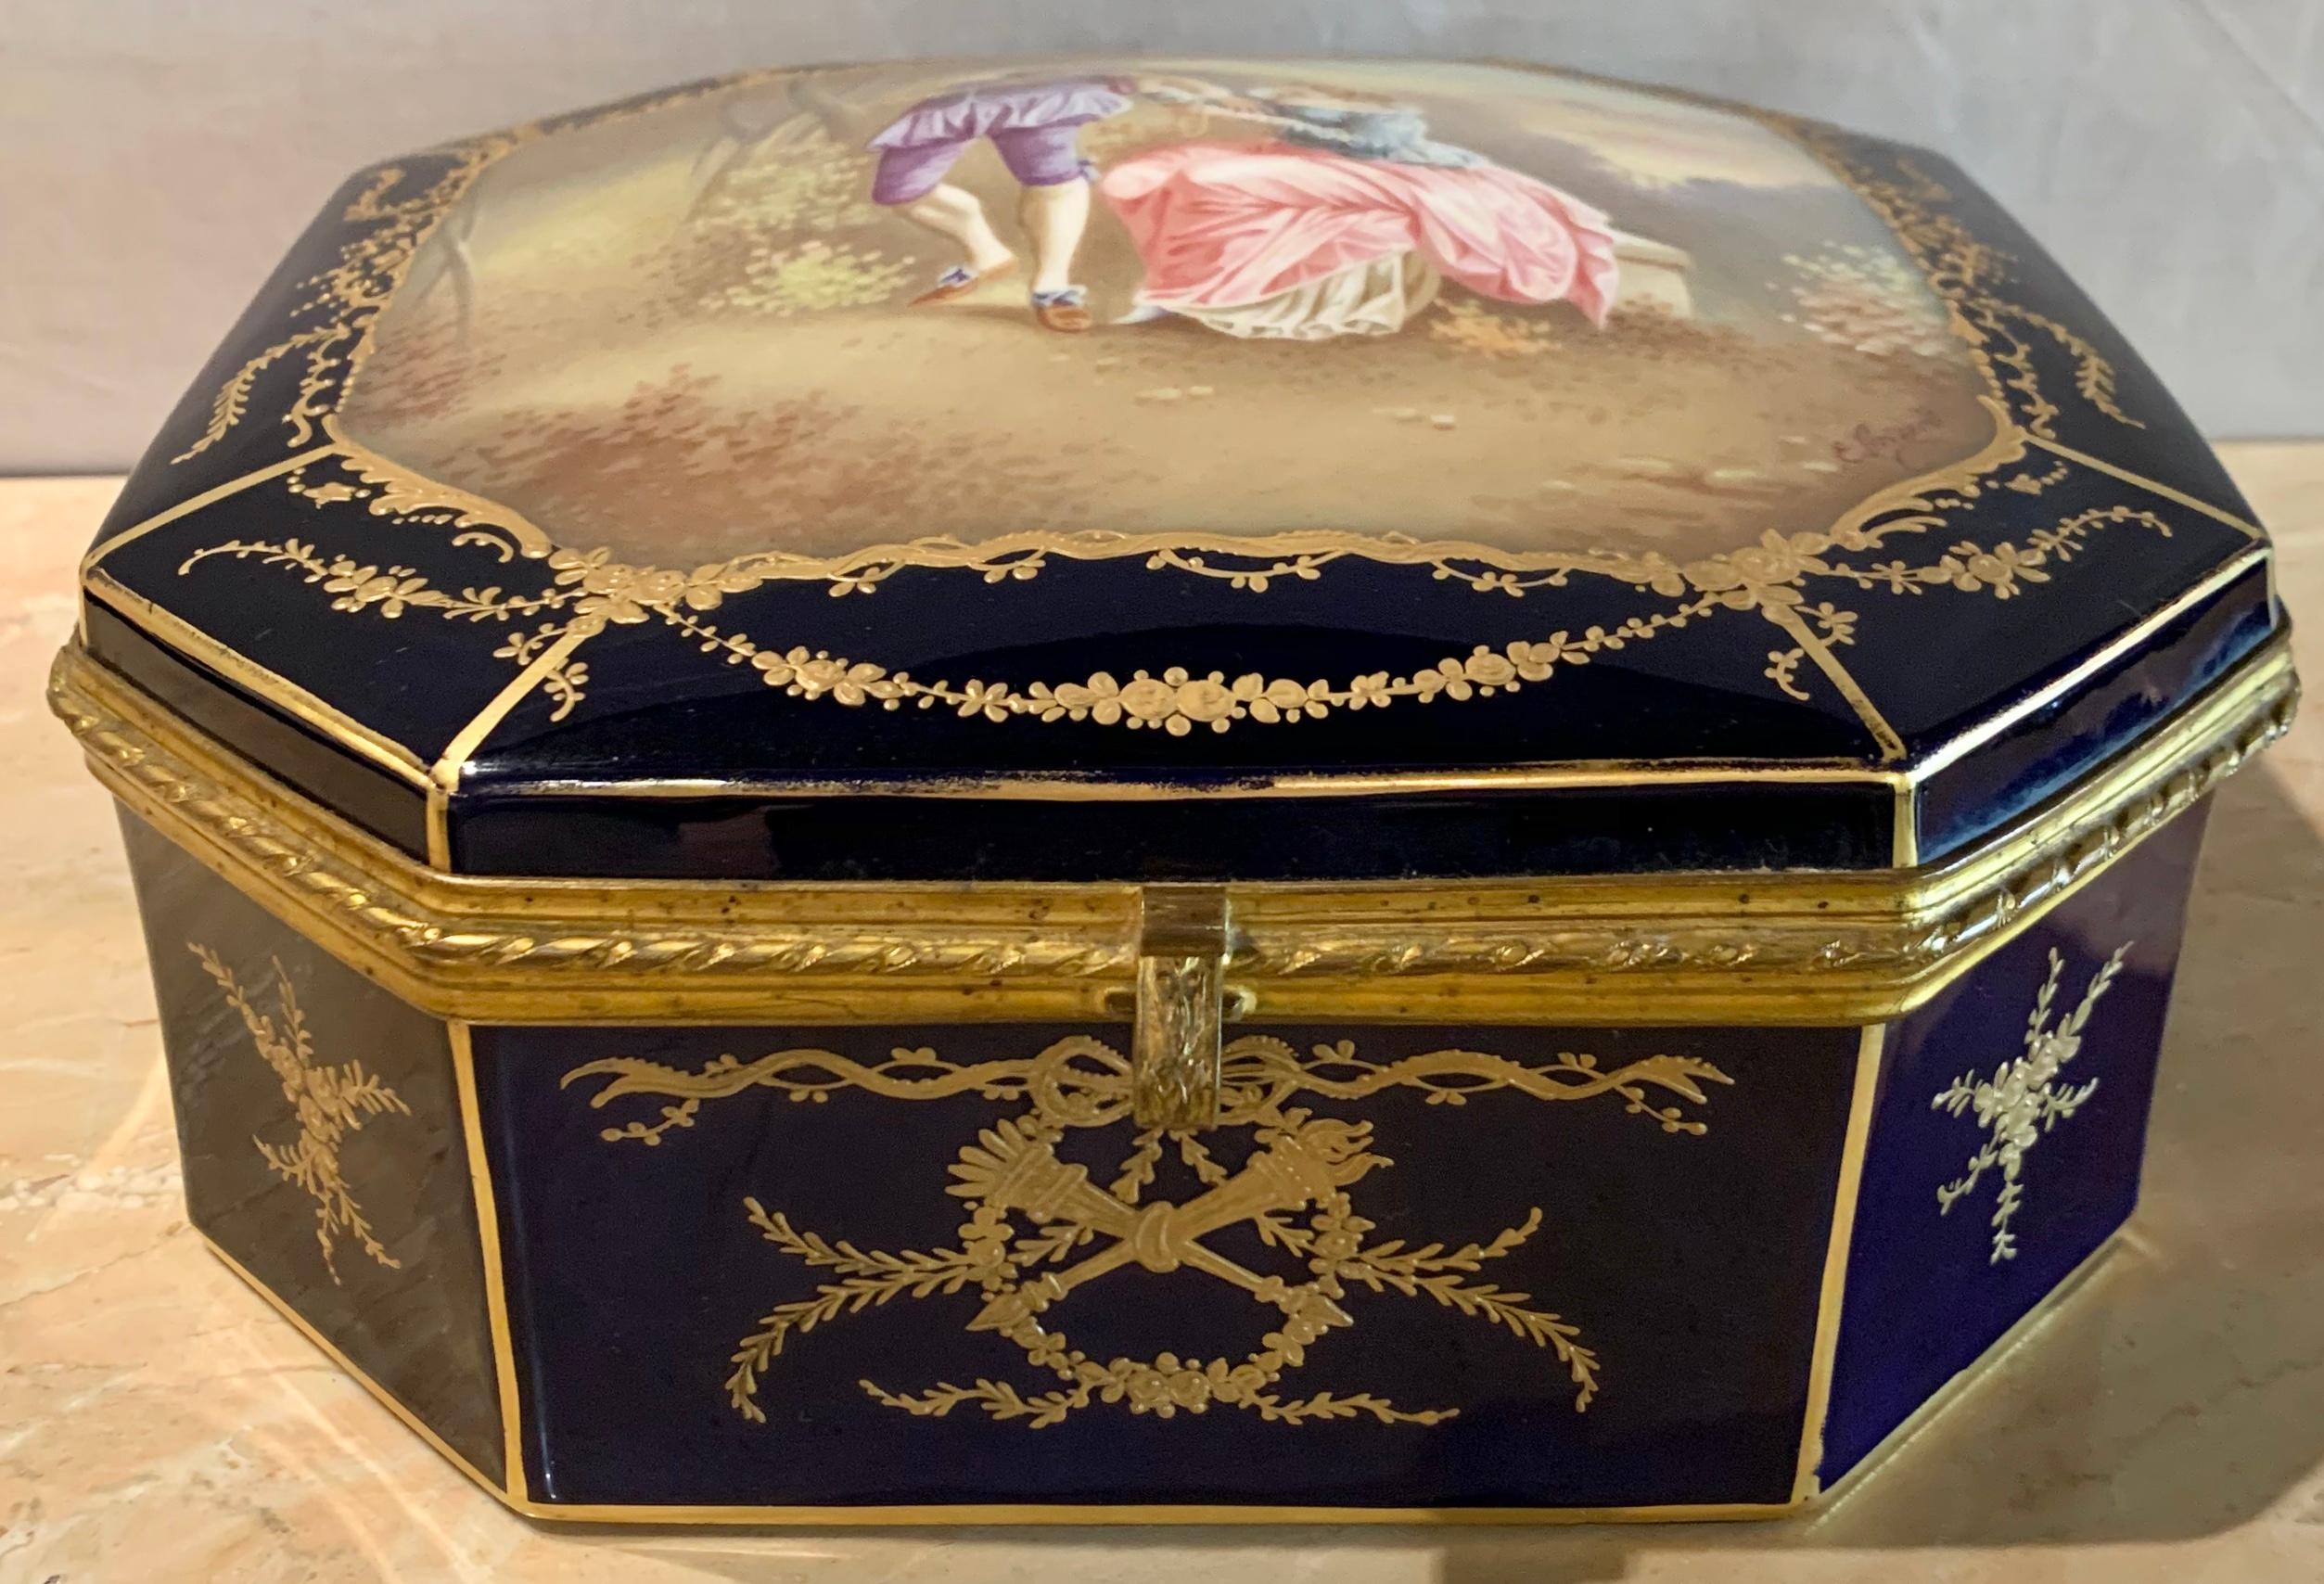 19th century French Sevres cobalt porcelain and gilt bronze casket jewelry box. The cobalt blue porcelain and gilt bronze casket or jewelry box is simply stunning with hand painted courting scene to cover, signed E. Grisard.
The interior having